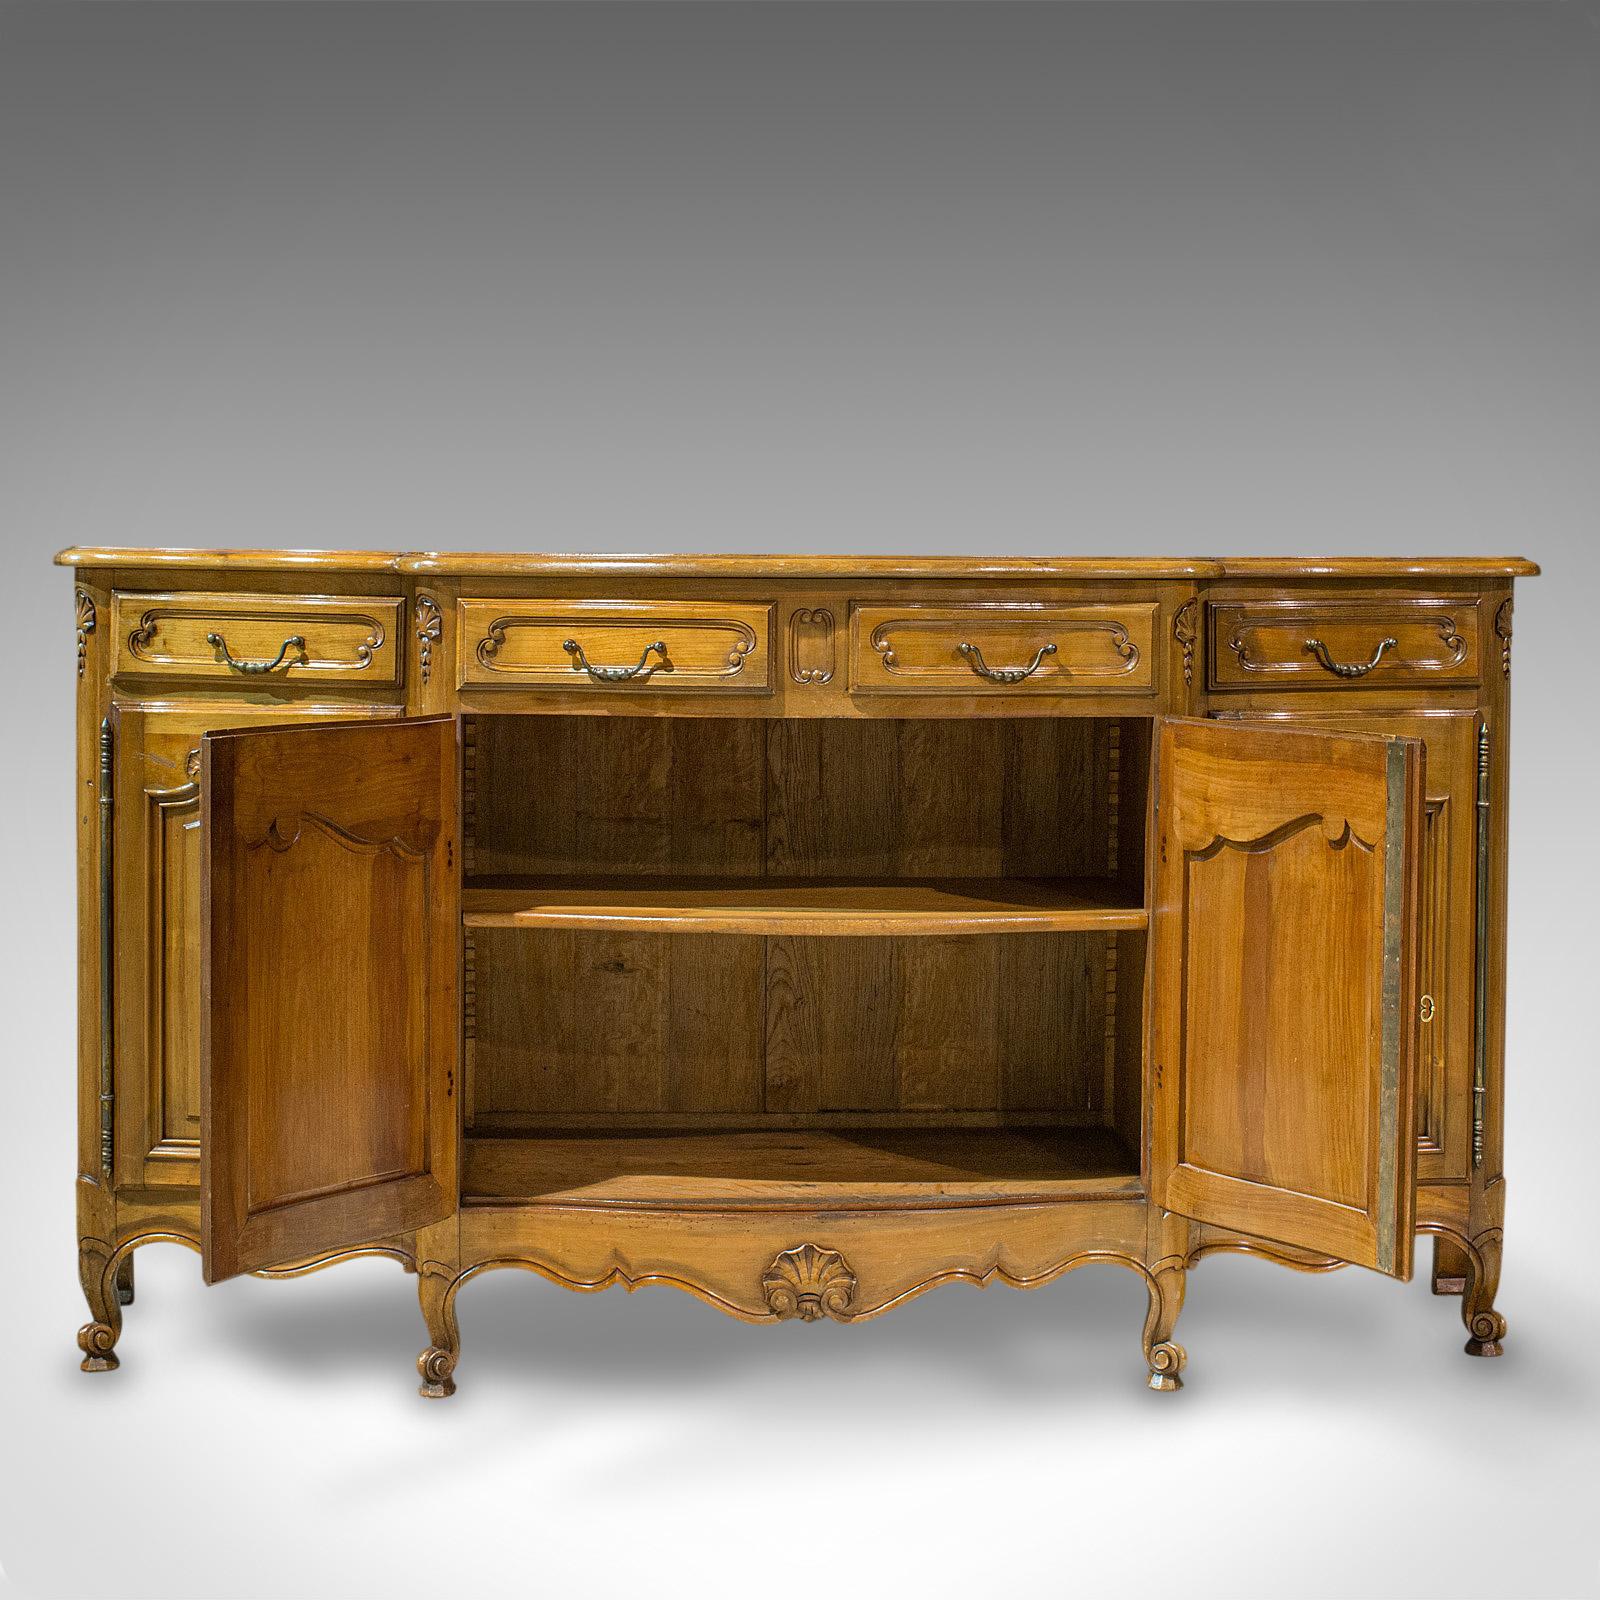 French Provincial Vintage Bow-Front Dresser, French, Walnut, Provincial, Sideboard, circa 1930